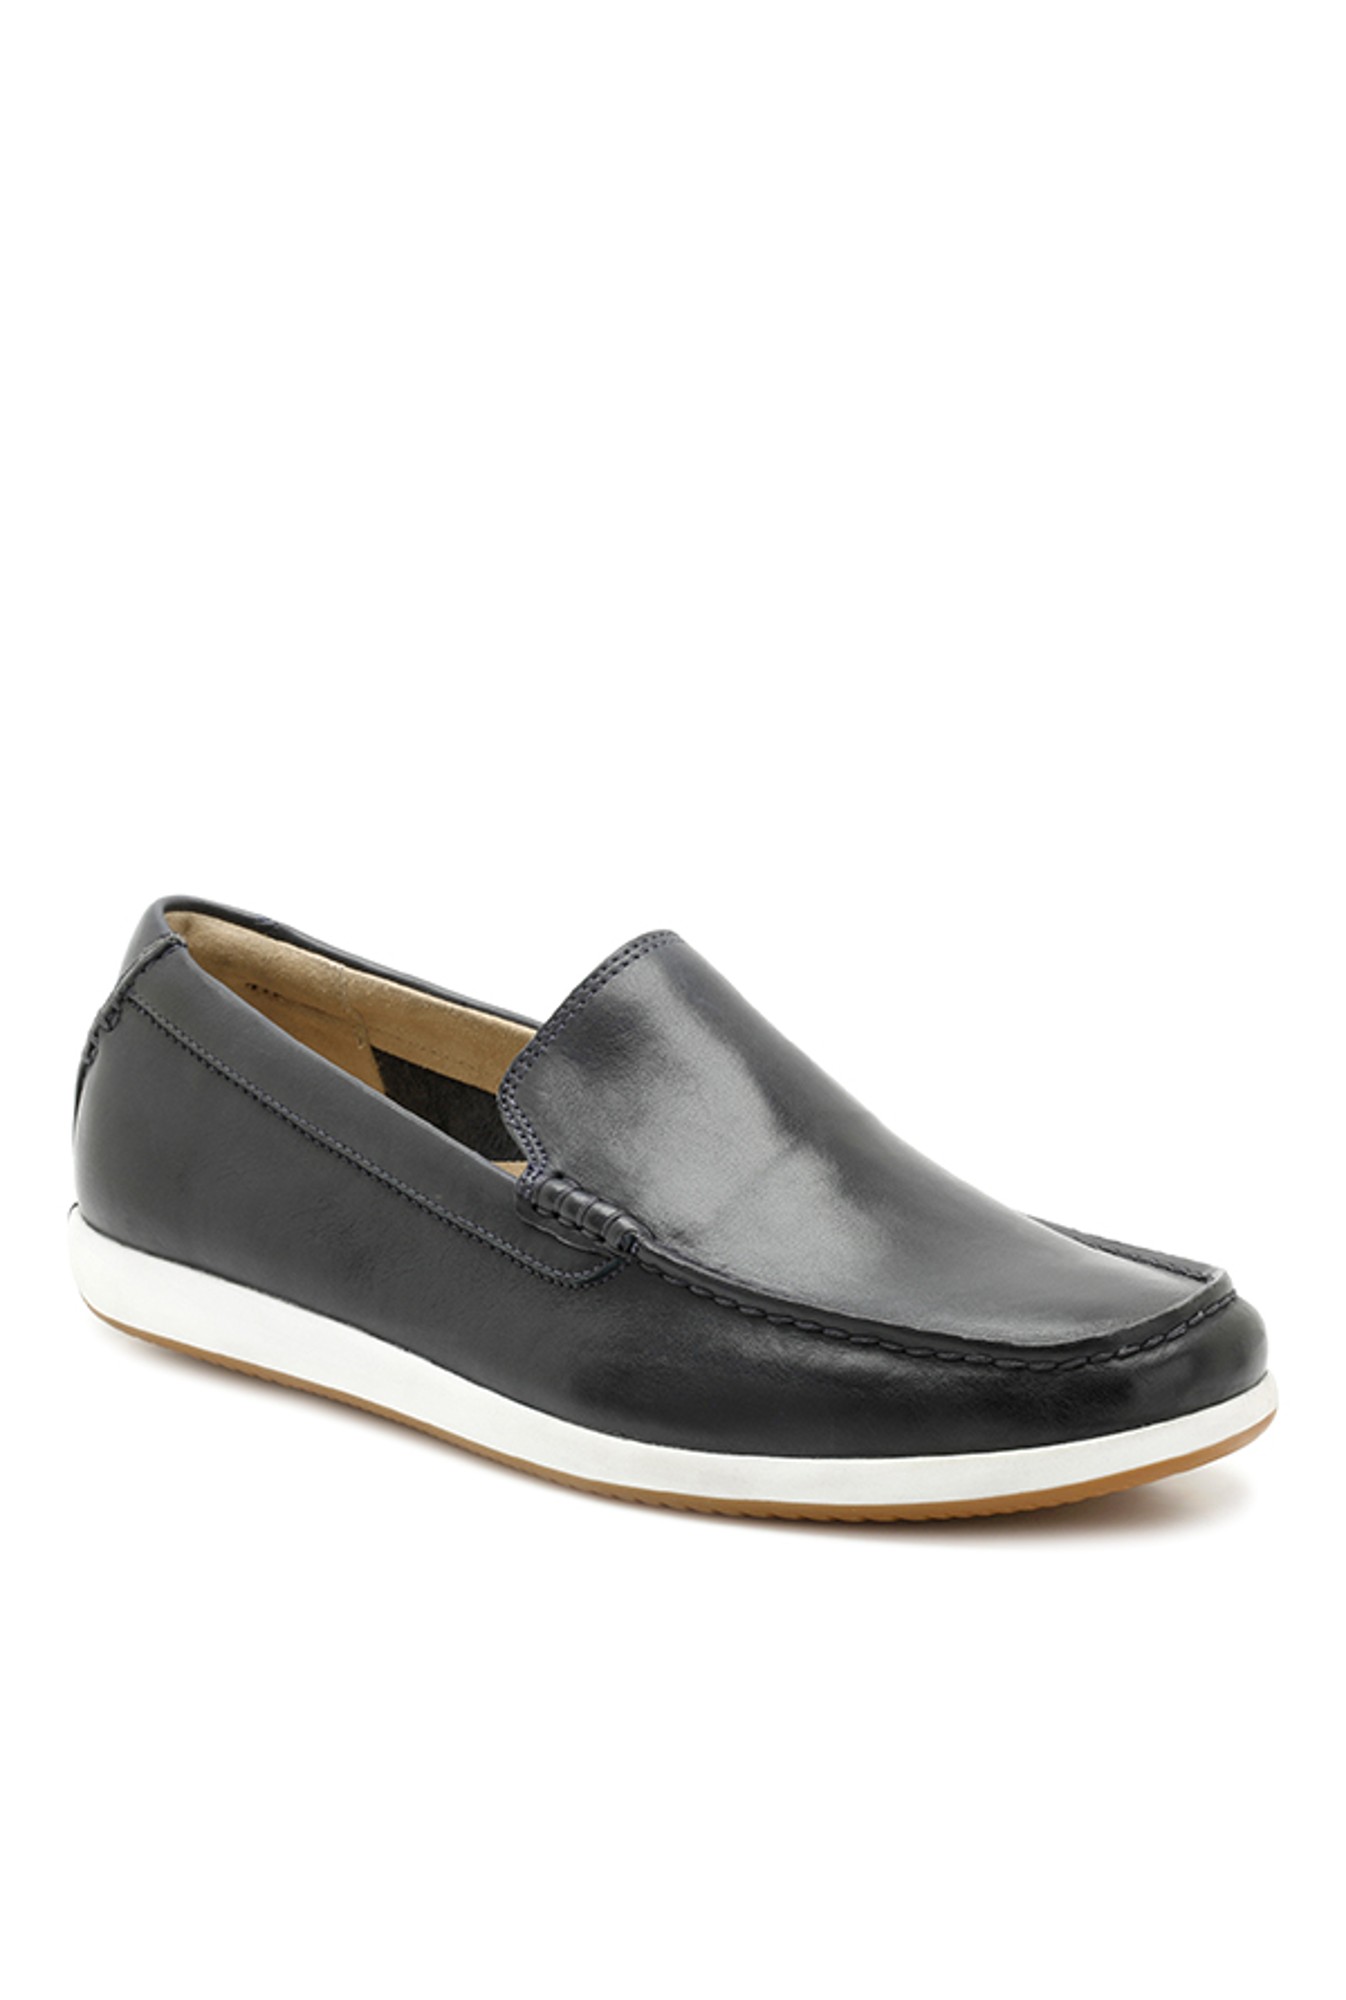 Clarks Newton Drive Navy Loafers from 